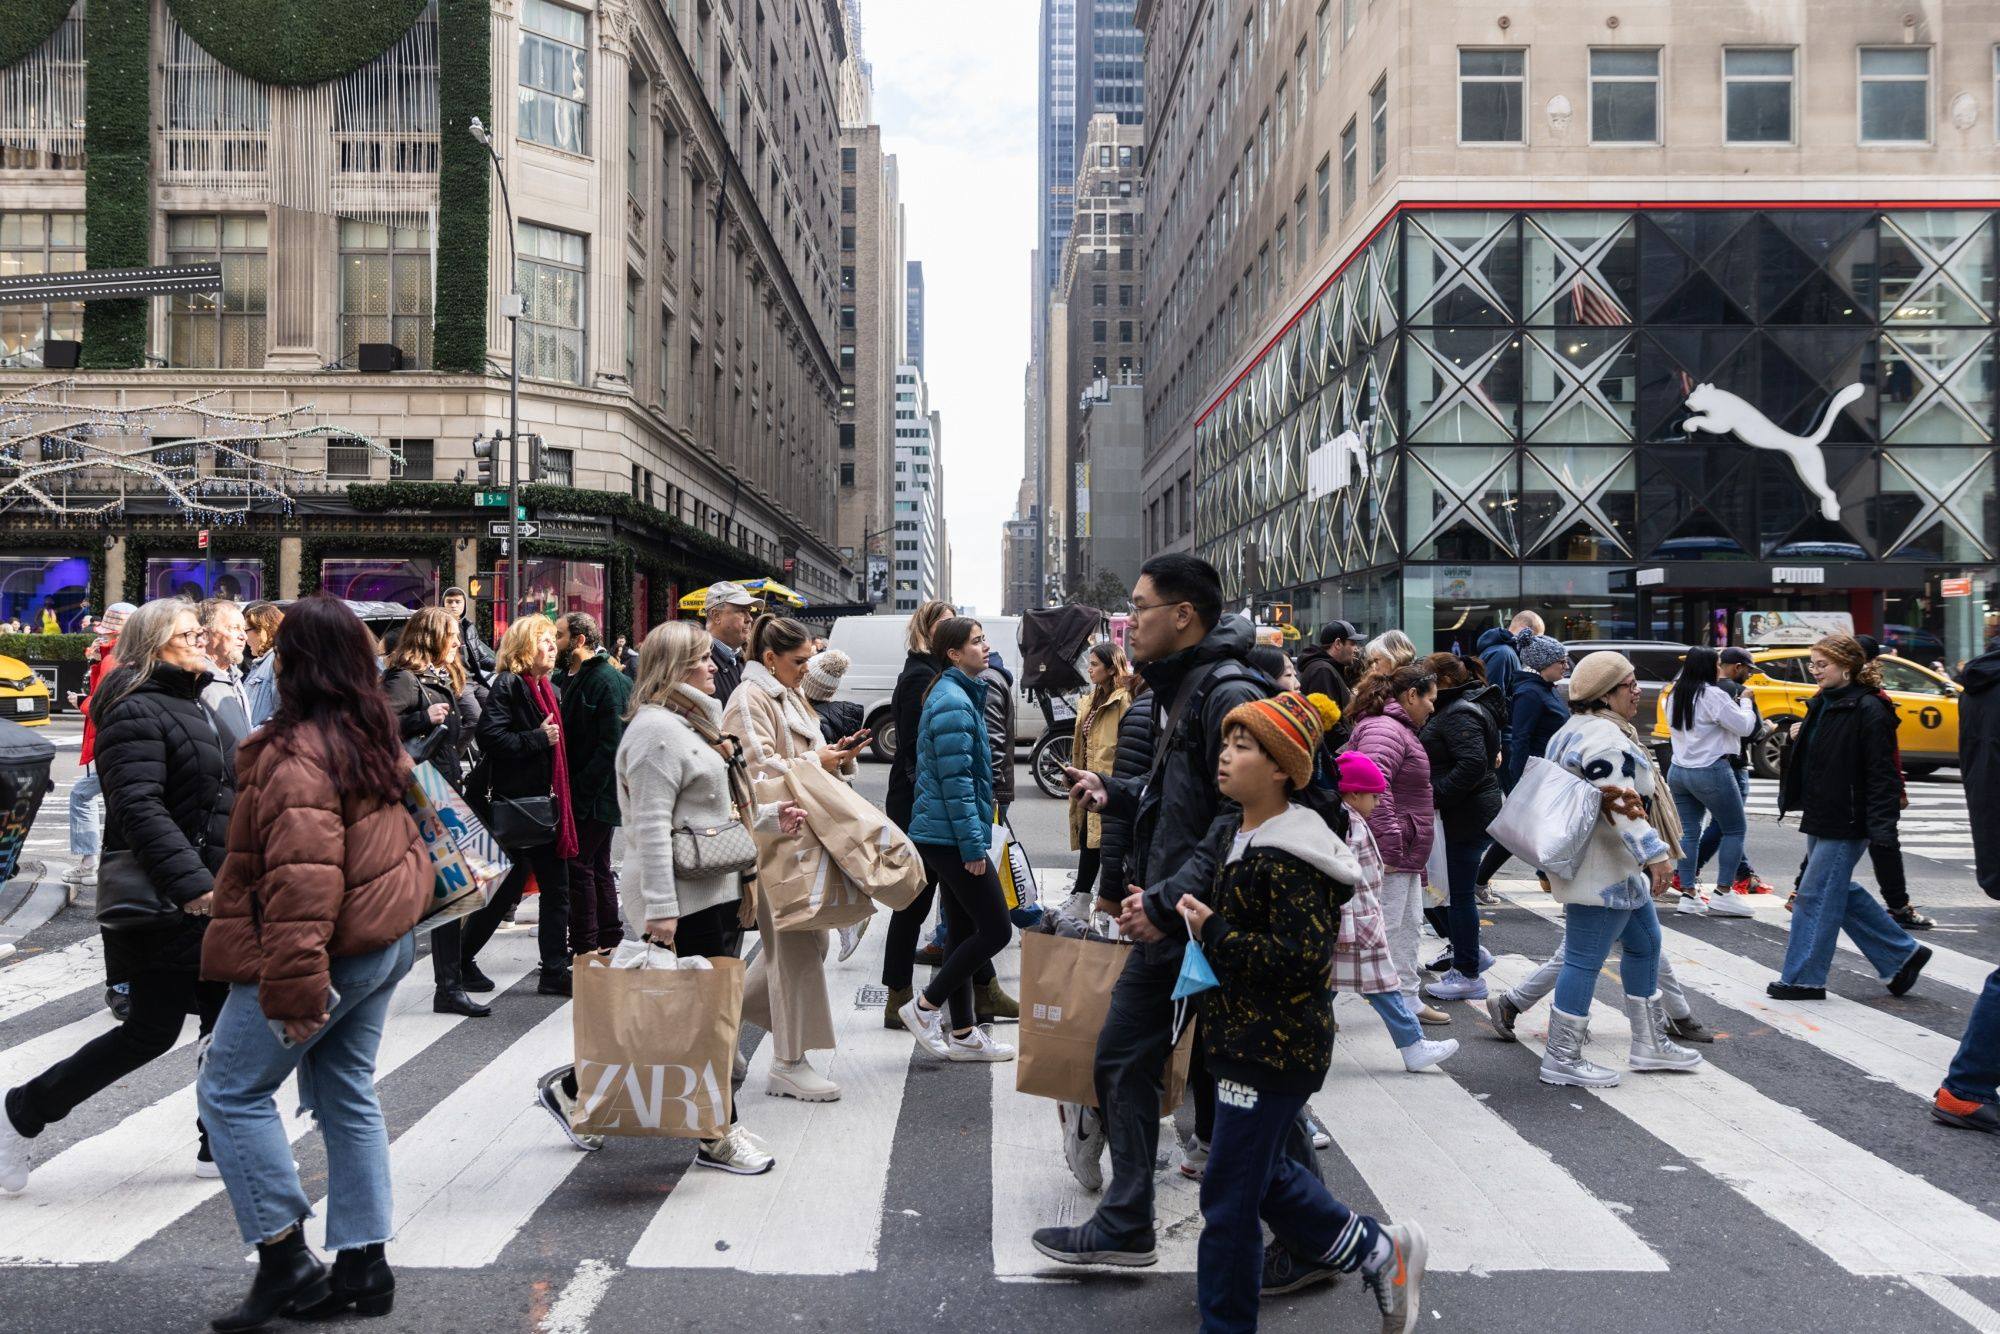 US shoppers walk along 5th Avenue on Black Friday in New York on November 25. The country added 263,000 jobs in November amid the surging rate increases by the Federal Reserve. With the American labour market still tight, risks to inflation remain high. Photo: Bloomberg